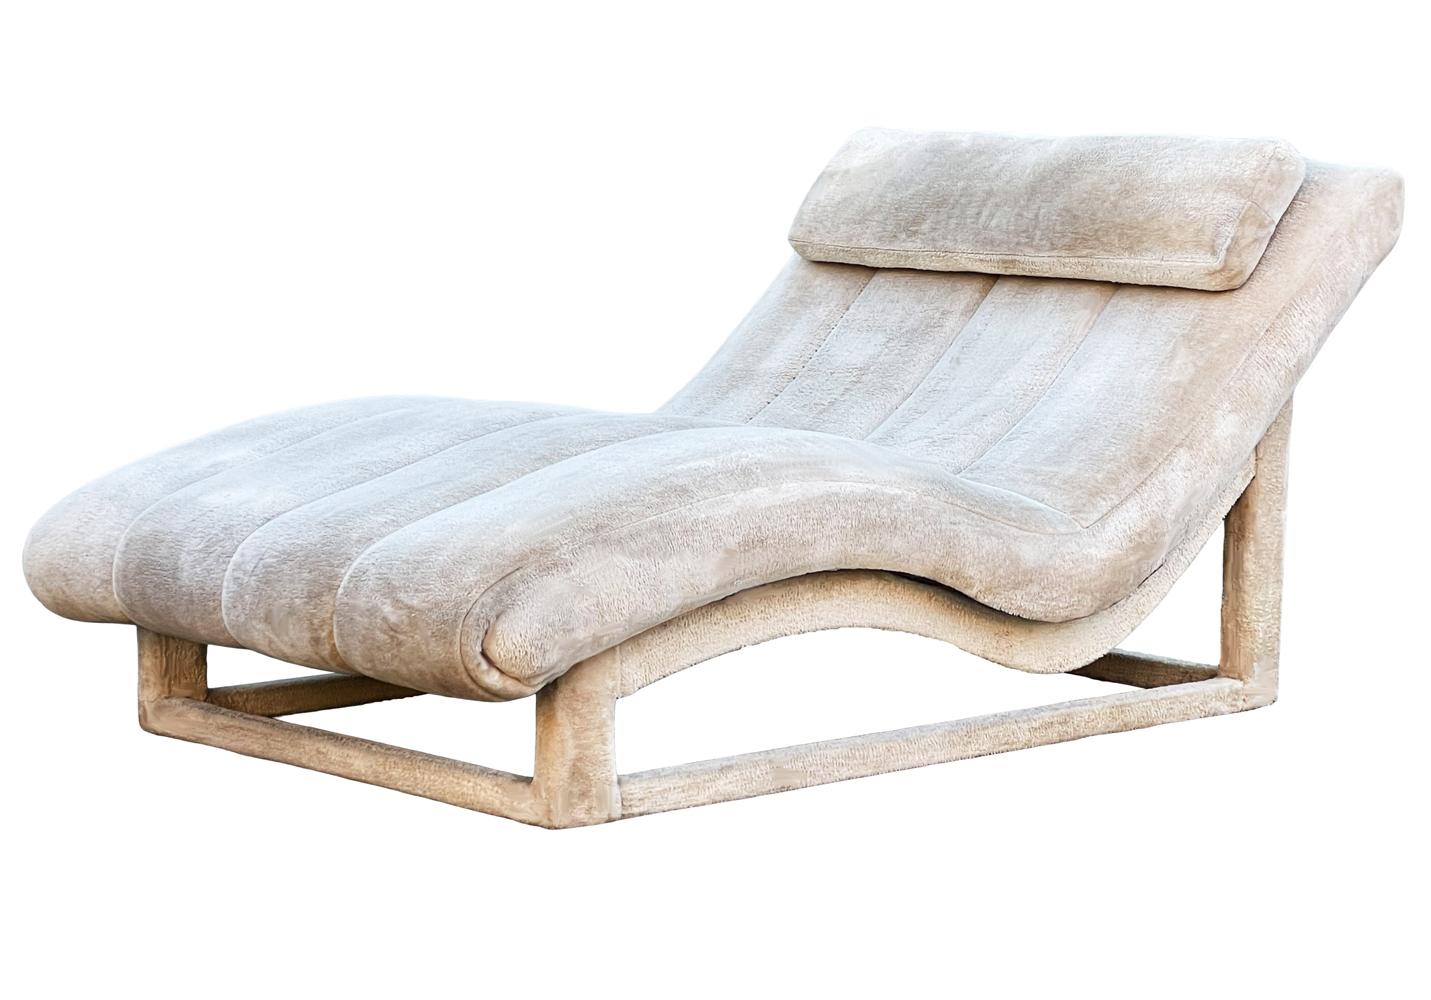 A vintage wave chaise lounge circa 1970's. Currently in its original faux fur upholstery and ready for your custom fabric.